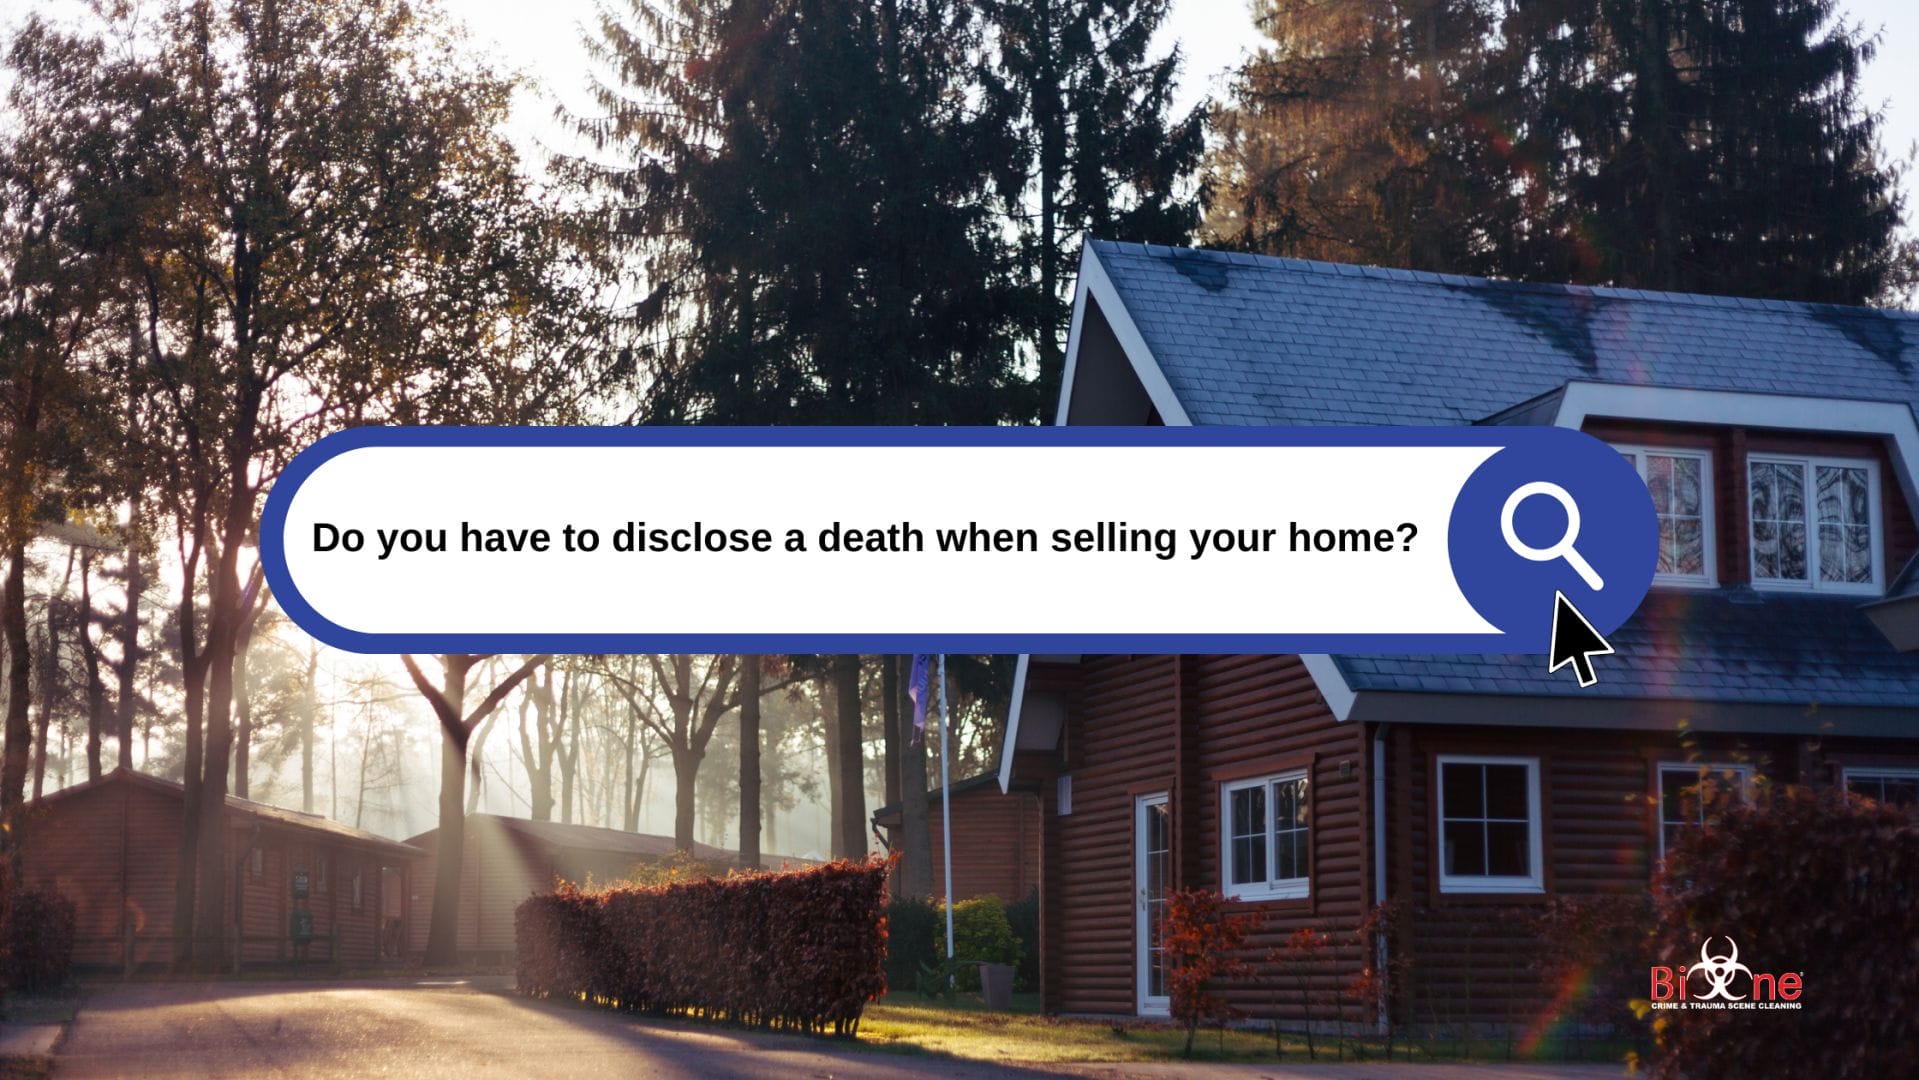 Disclosing death when selling a home in North Carolina